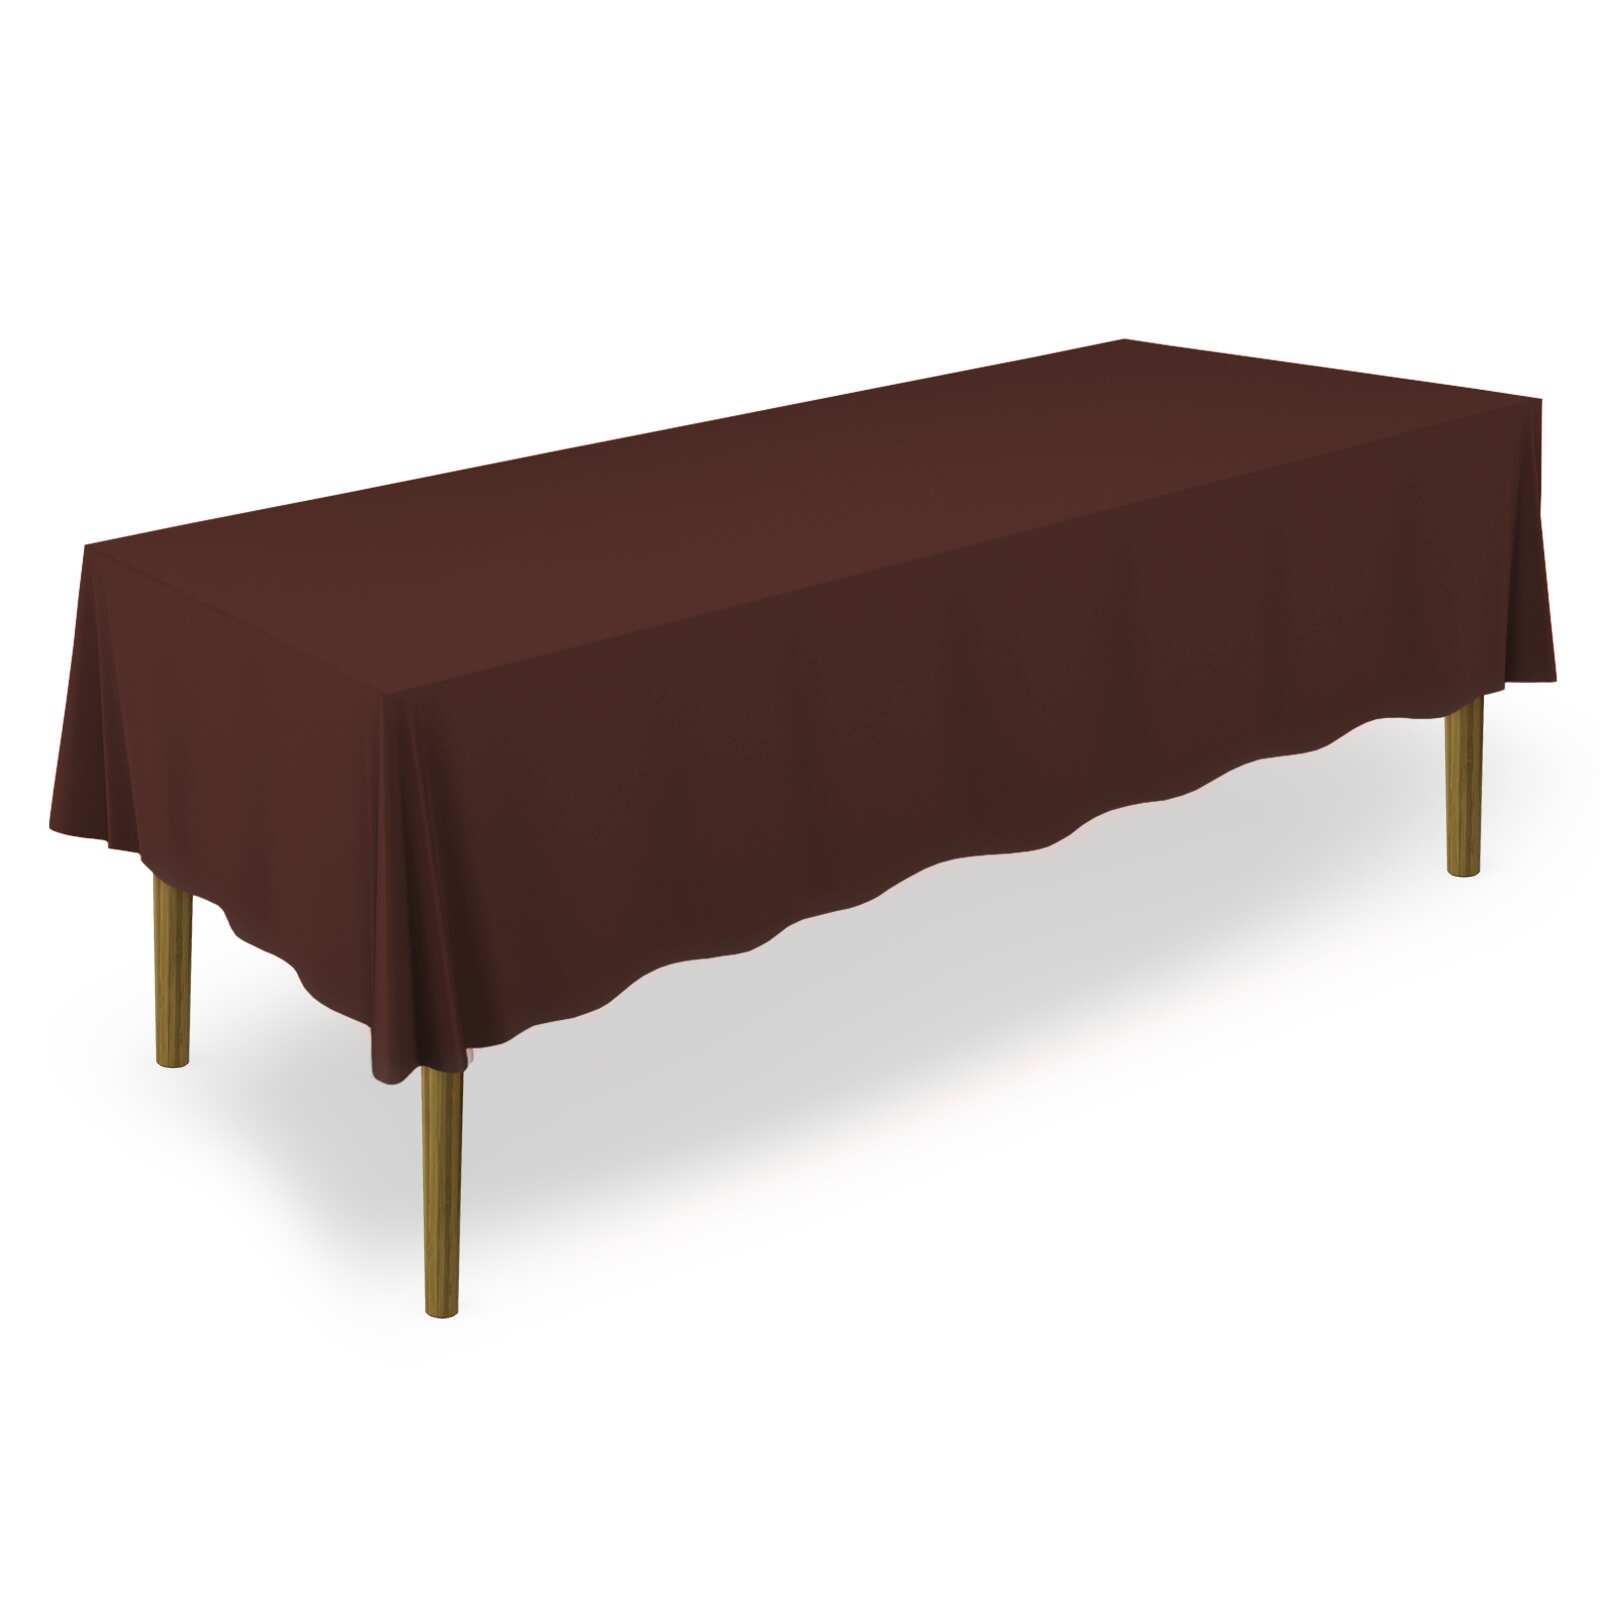 70 x 120" 10-Pack Rectangular Polyester Tablecloths - Chocolate